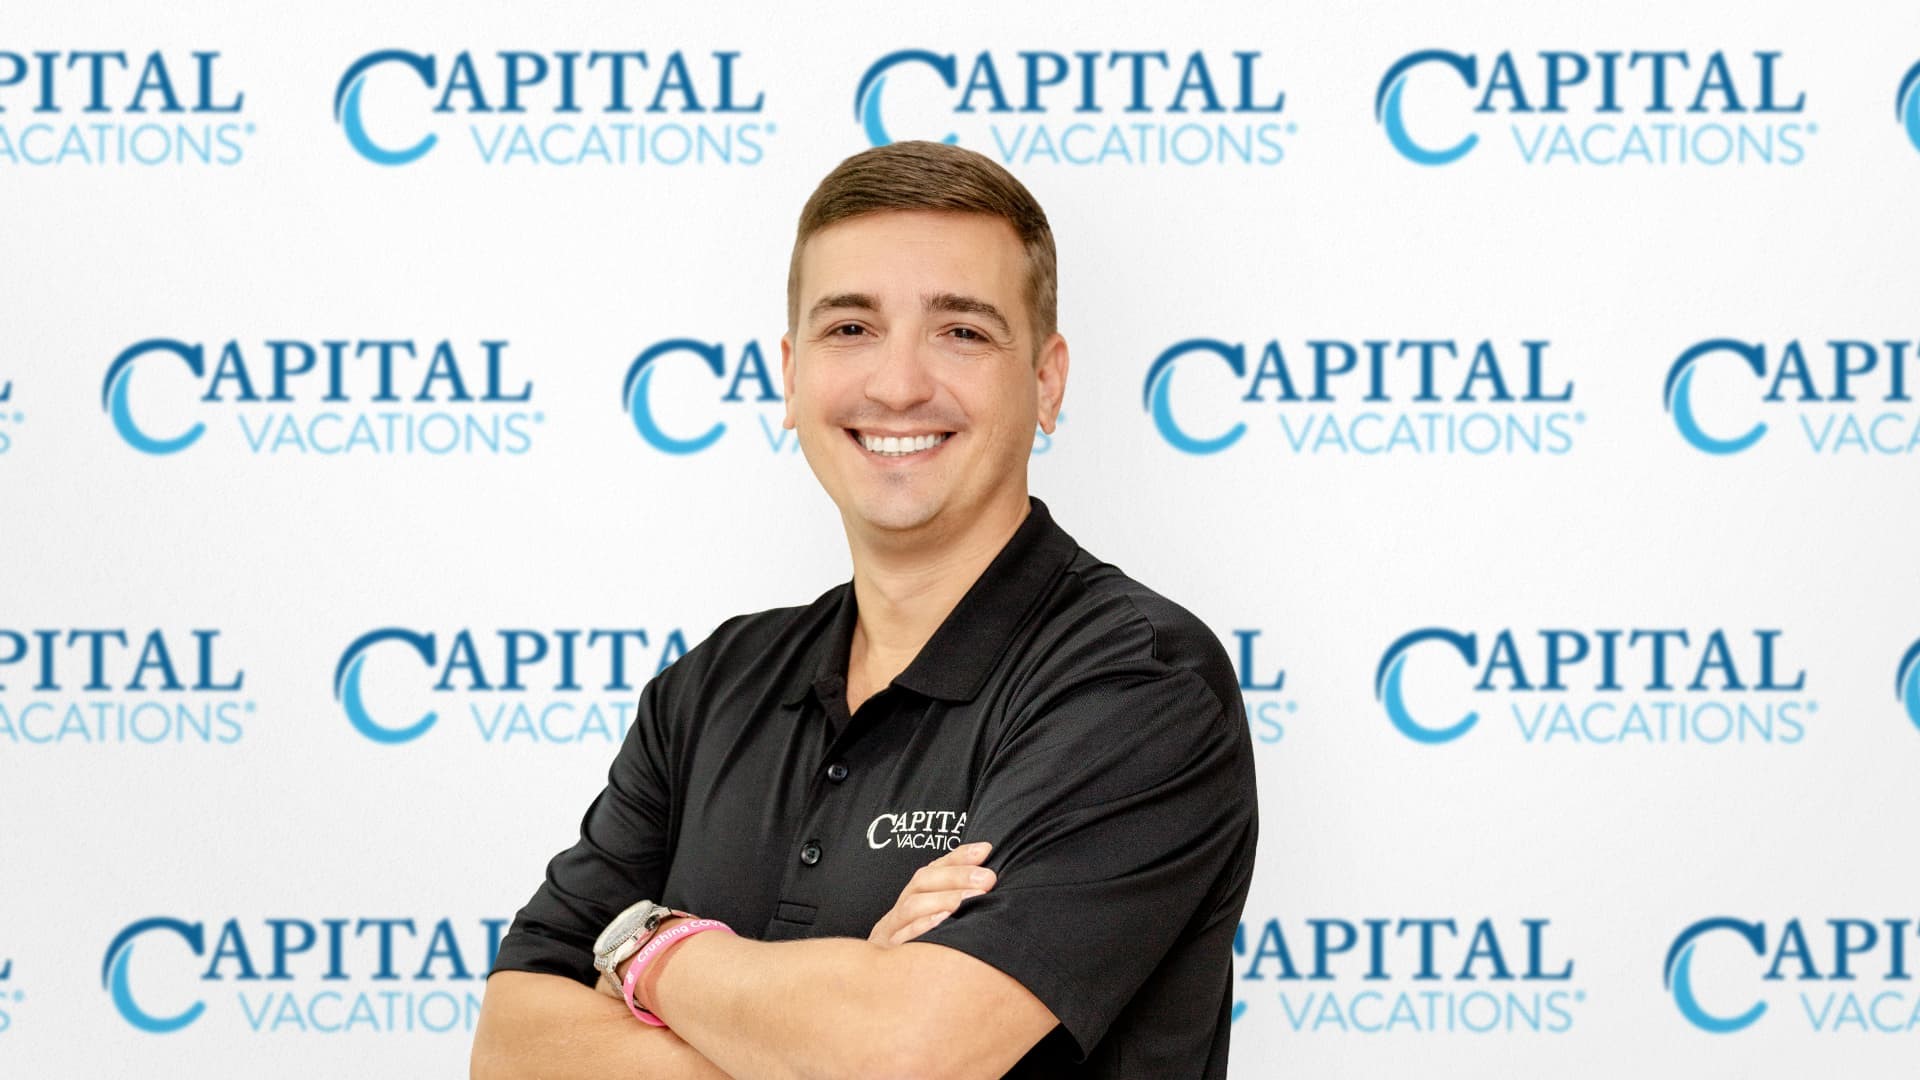 Capital Vacations appoints Mike Federico Chief Financial Officer Feature Image